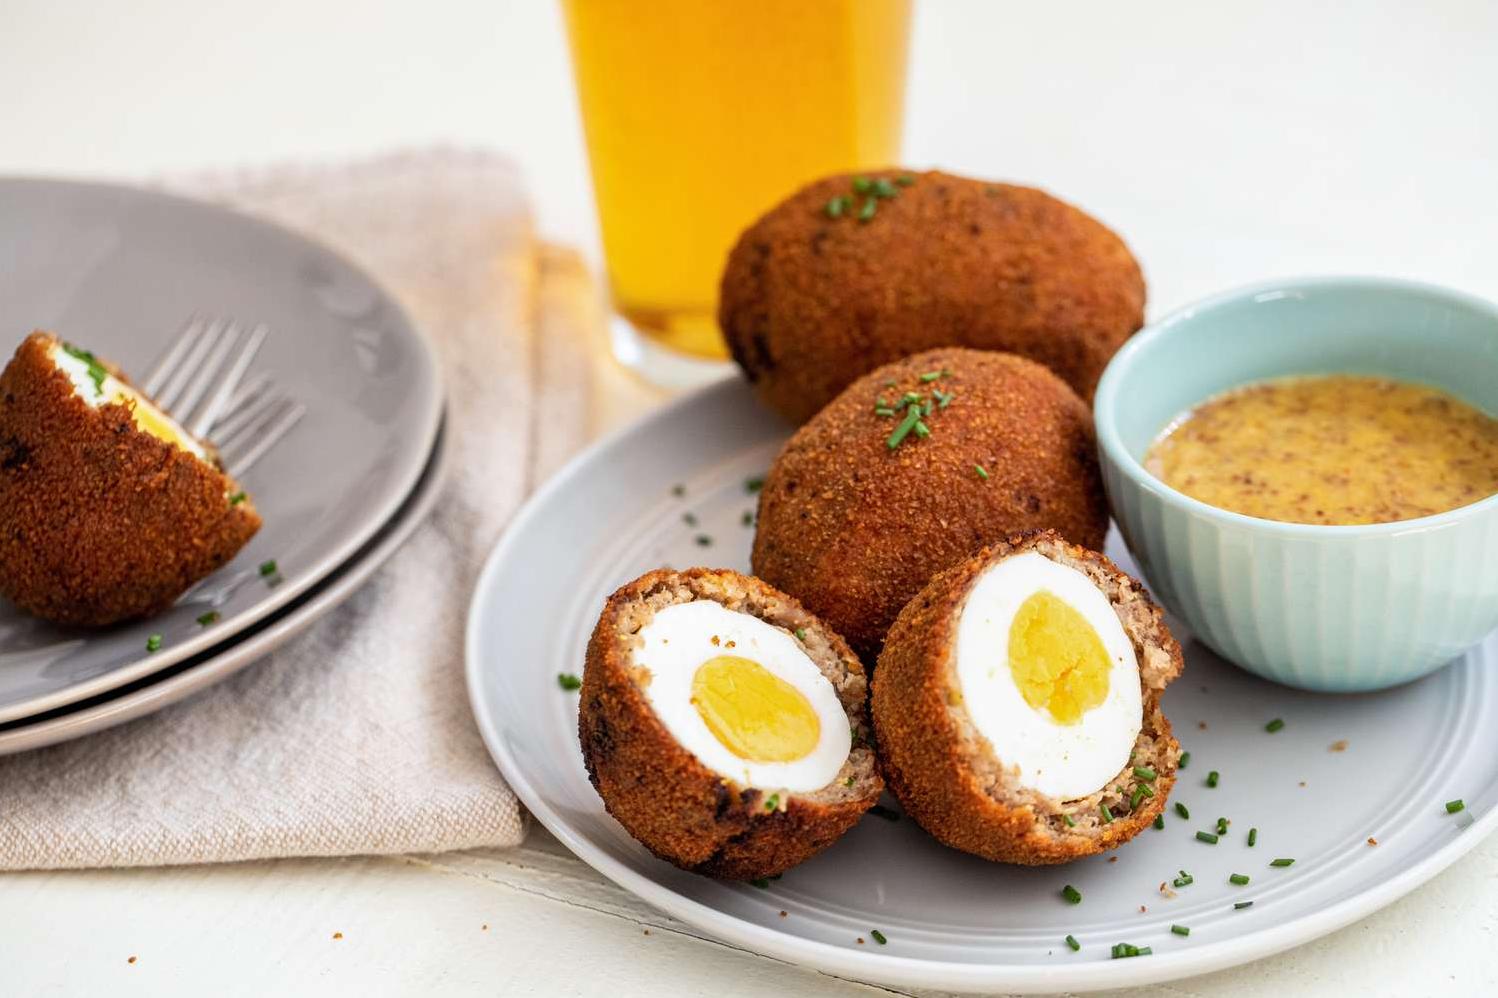  Elevate your brunch game with Spiced Scotch Eggs.